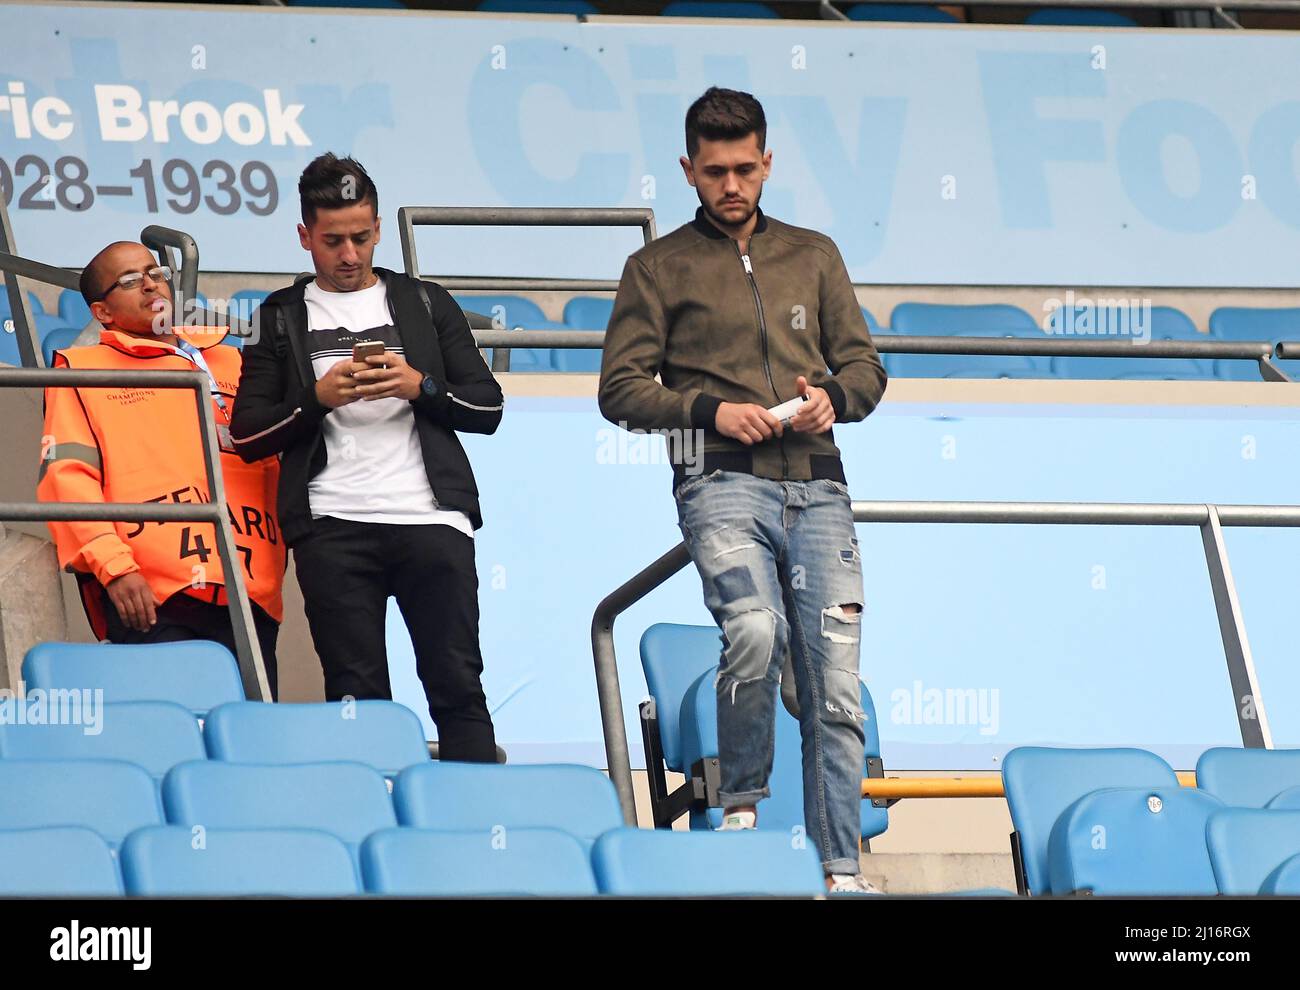 MANCHESTER, ENGLAND - AUGUST 24, 2016: Two fans check their phones prior to the second leg of the 2016/17 UEFA Champions League tie between Manchester City (Engalnd) and FCSB (Romania) at Etihad Stadium. Copyright: Cosmin Iftode/Picstaff Stock Photo